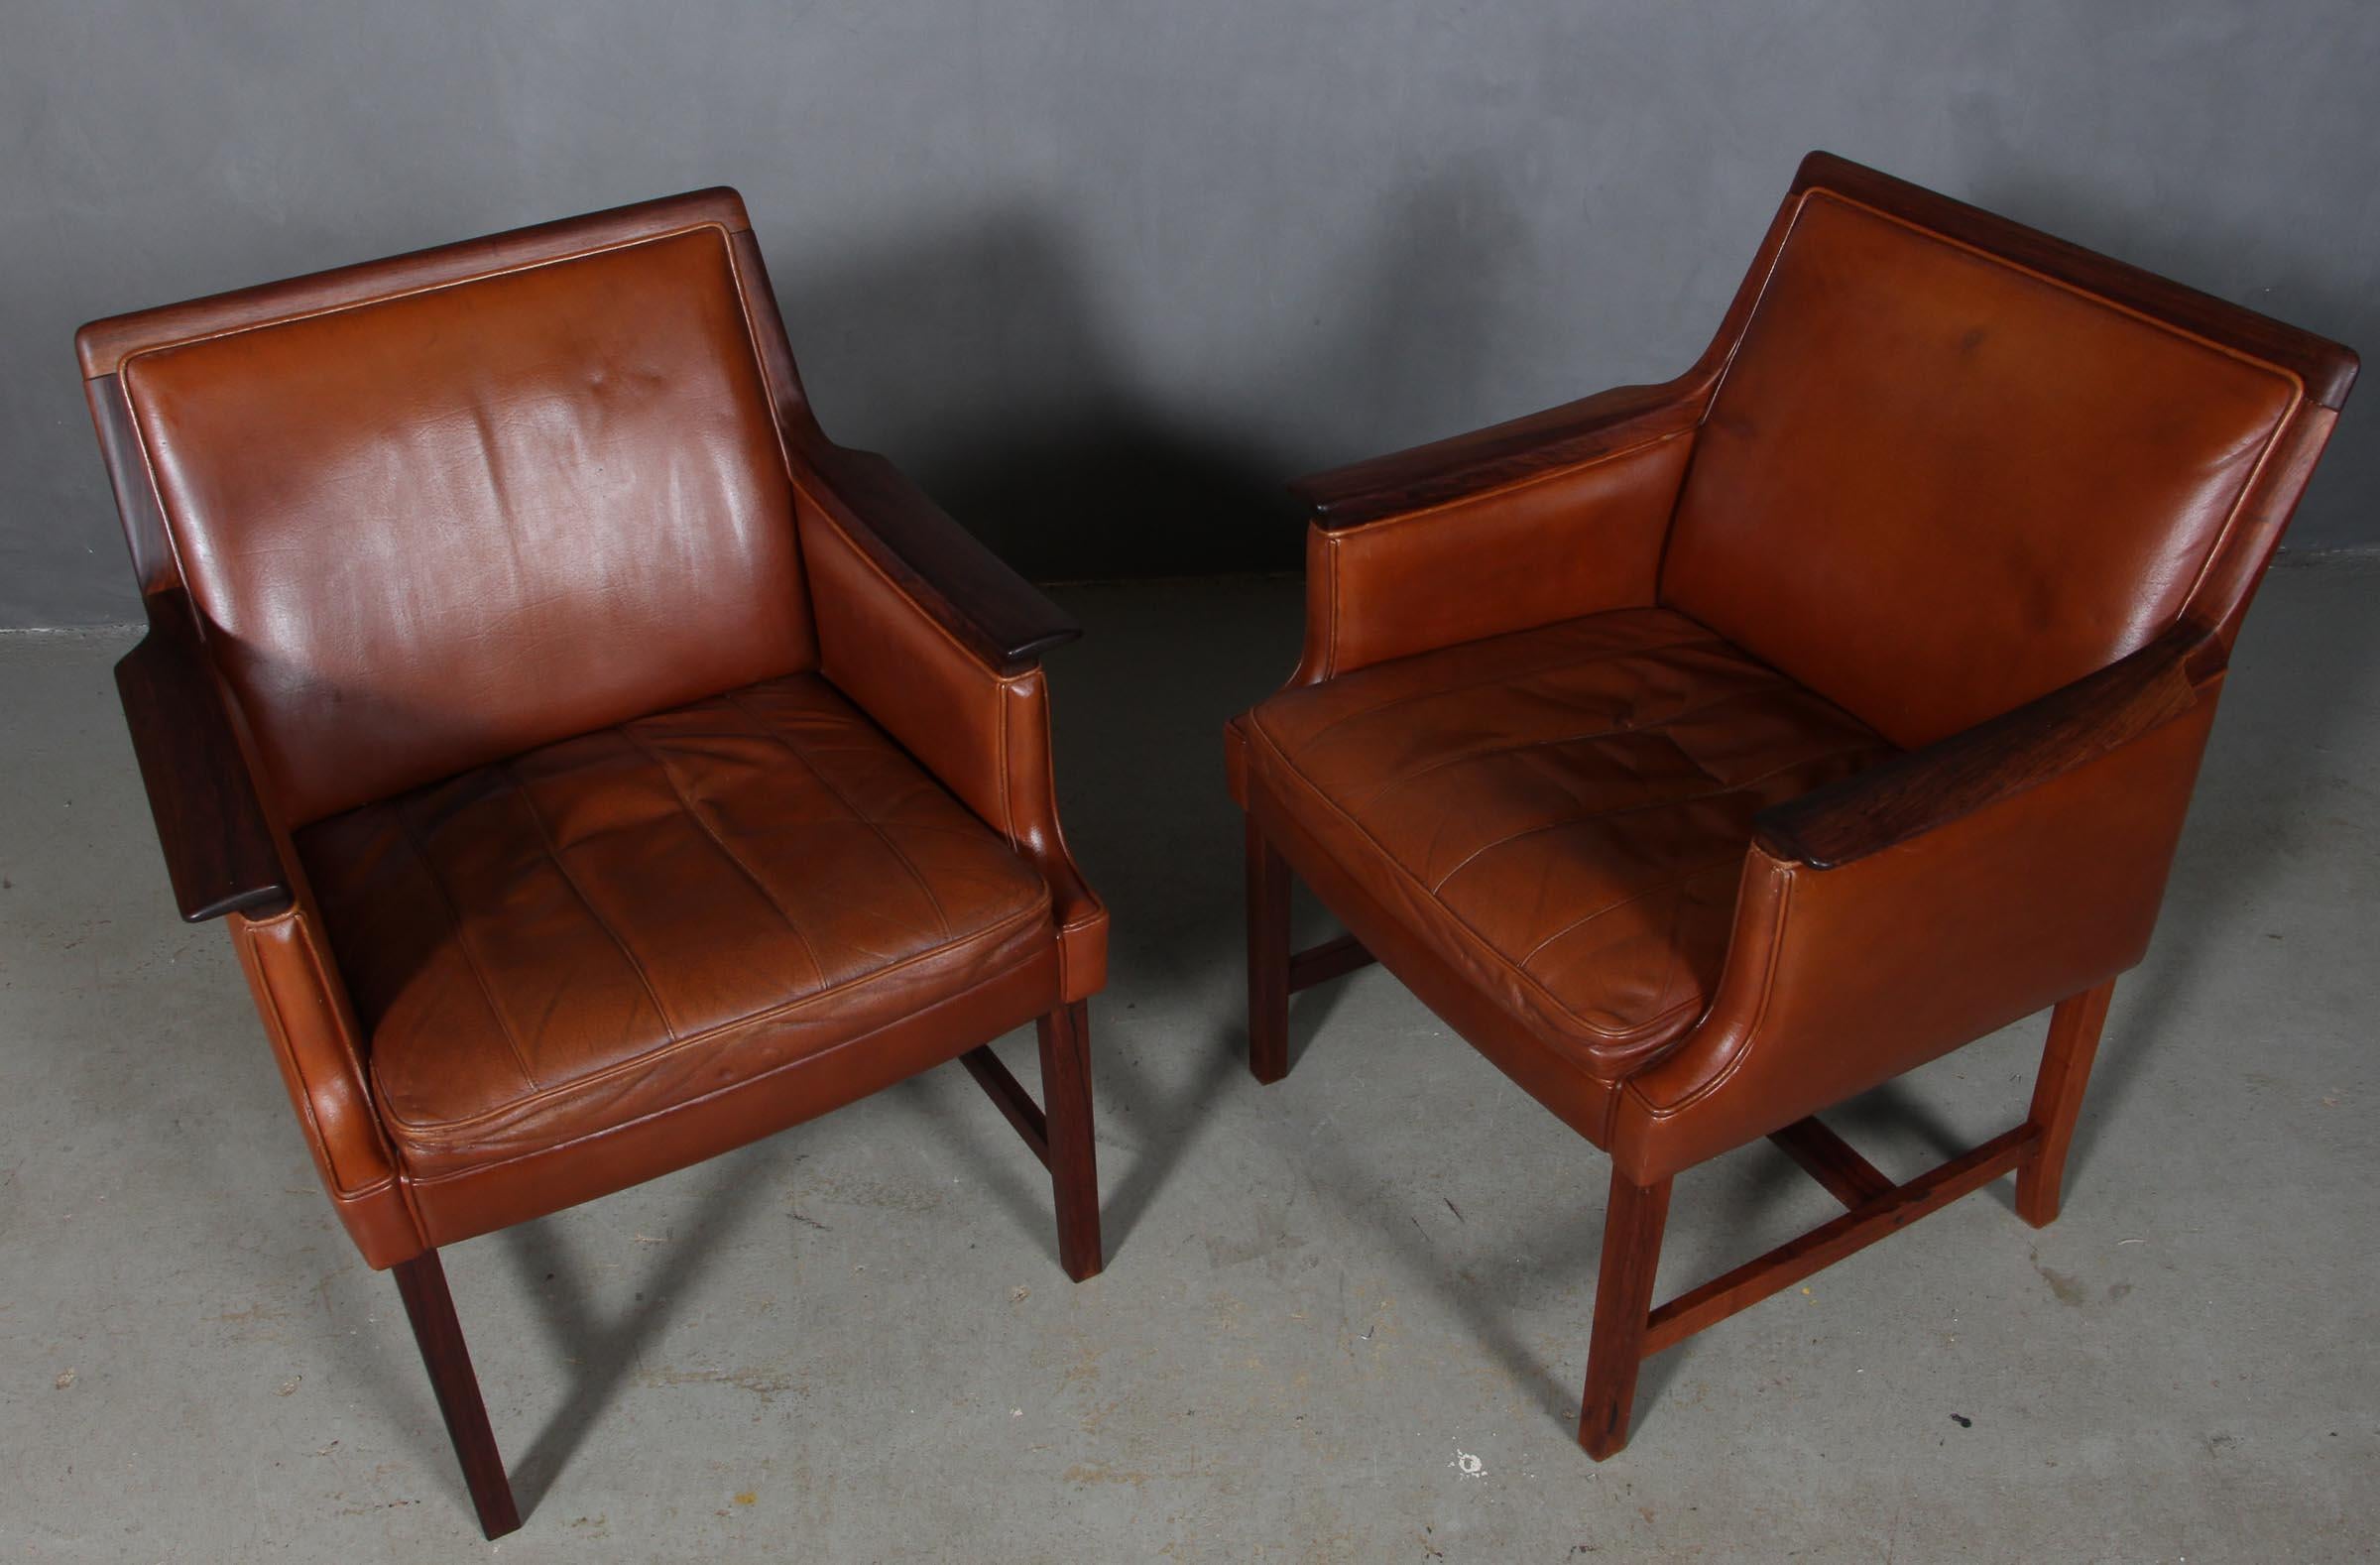 Torbjörn Afdal for Bruksbo pair of armchairs with original patinated leather.

Frame of rosewood.

Model Minerva, made by Bruksbo, Norway, 1960s.